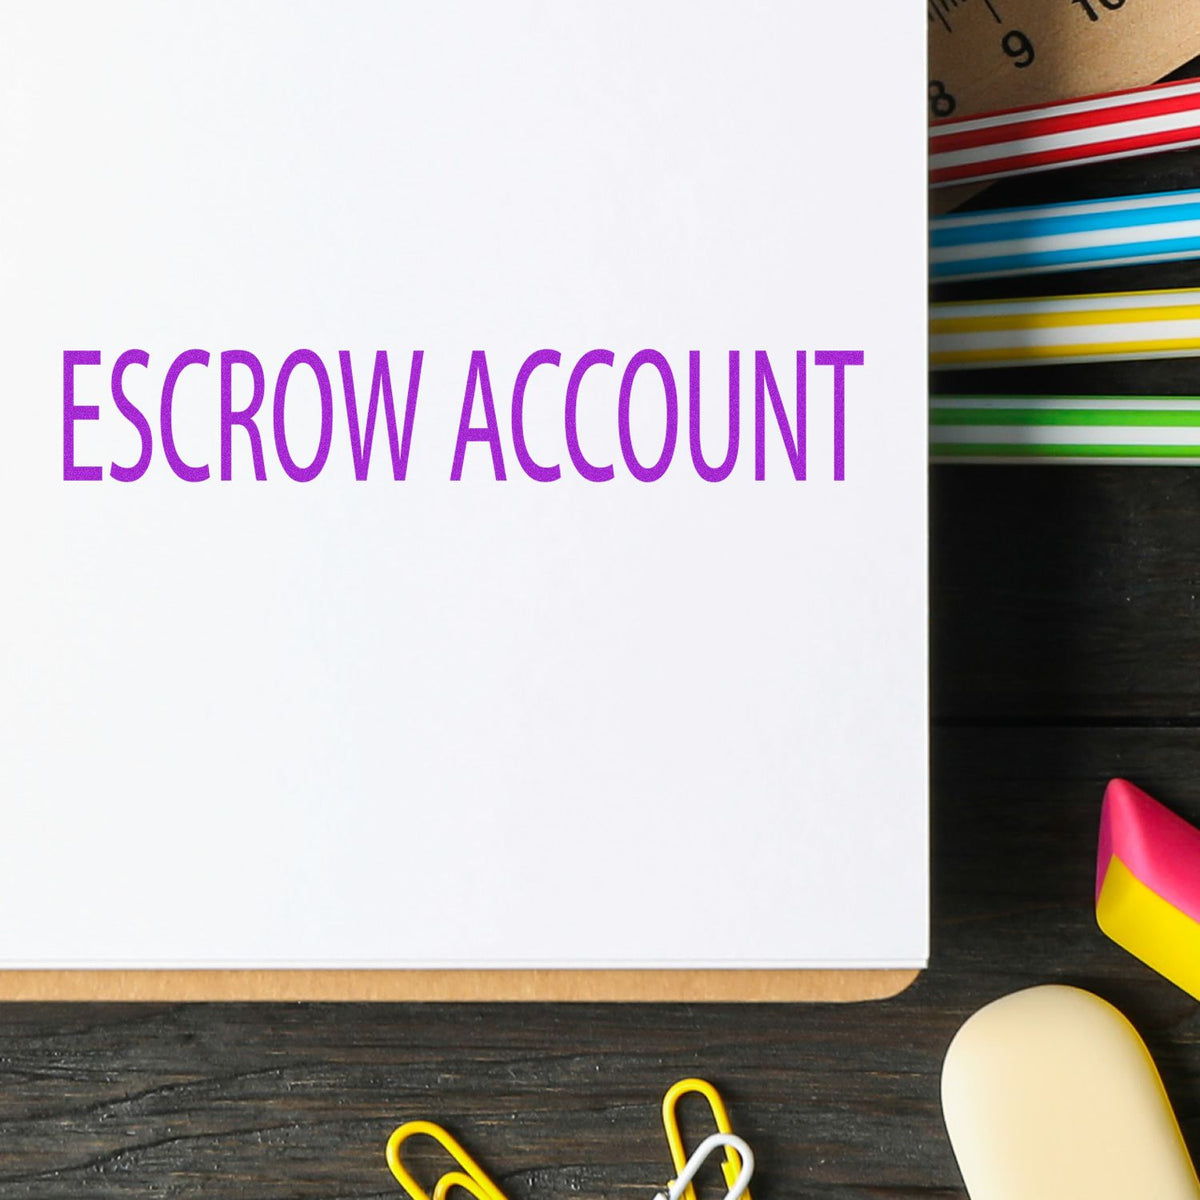 Self-Inking Escrow Account Stamp In Use